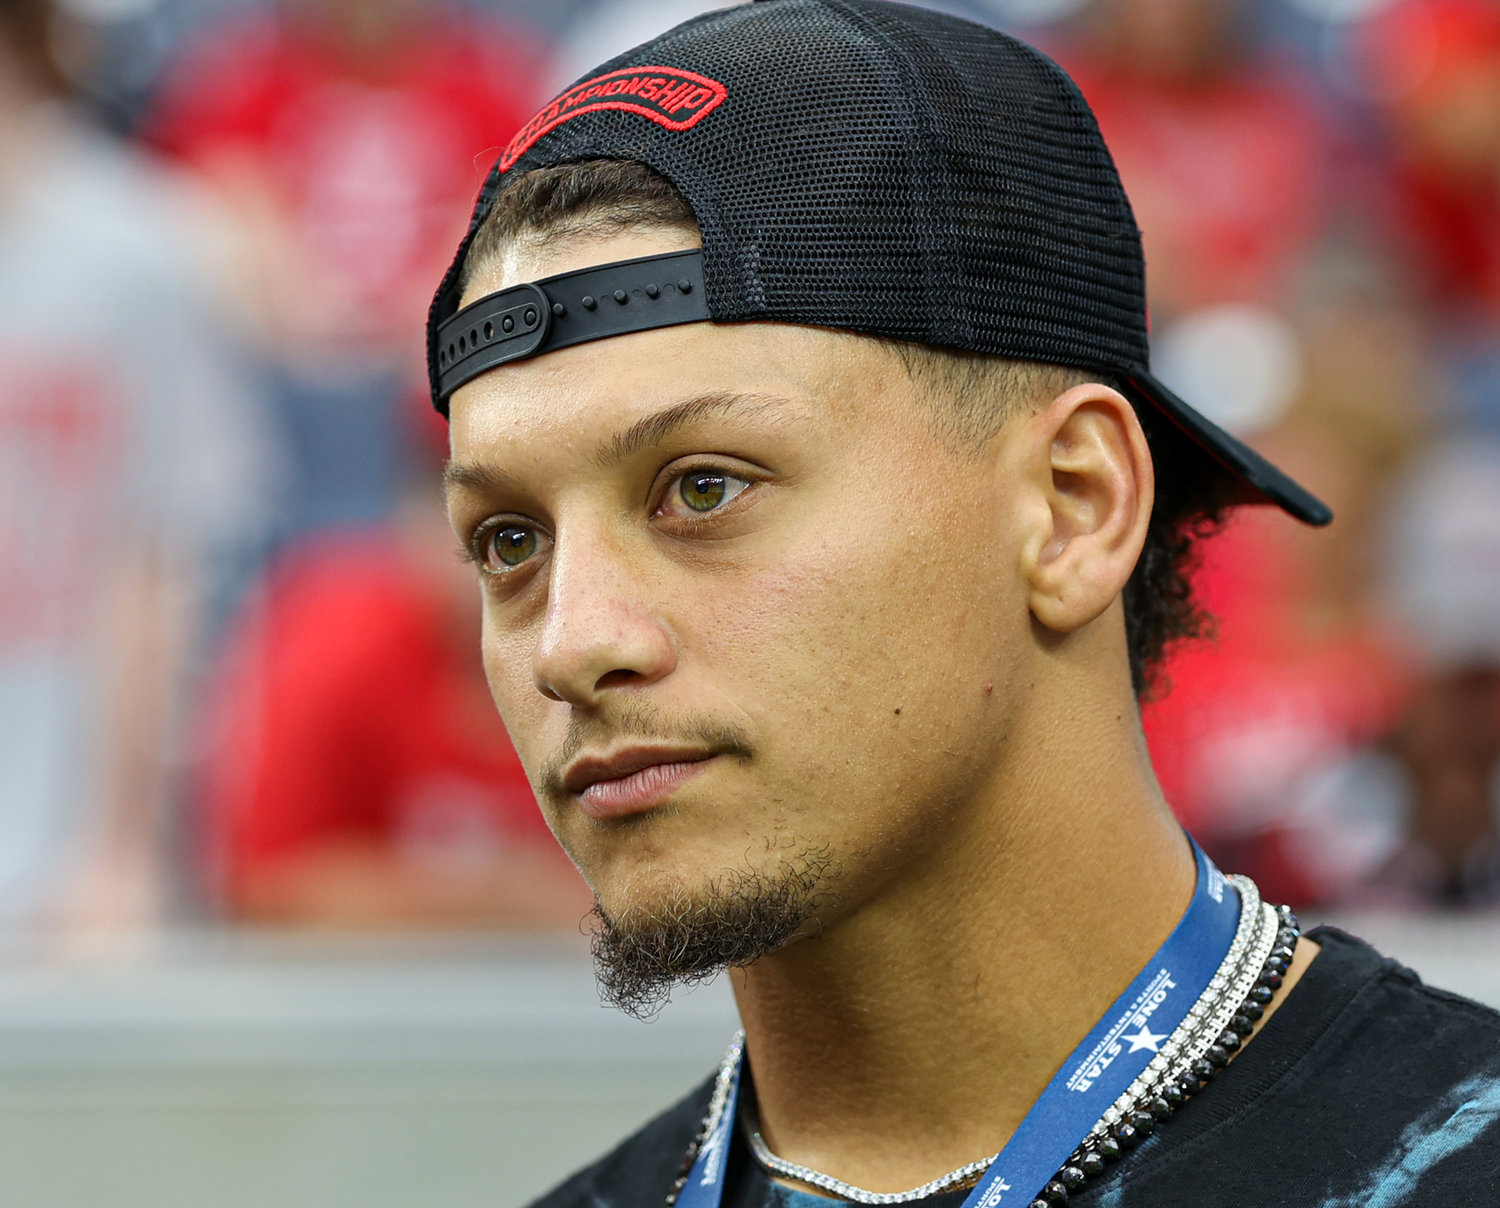 Kansas City Chiefs quarterback Patrick Mahomes on the sidelines before an NCAA football game between Houston and Texas Tech on September 4, 2021 in Houston, Texas.